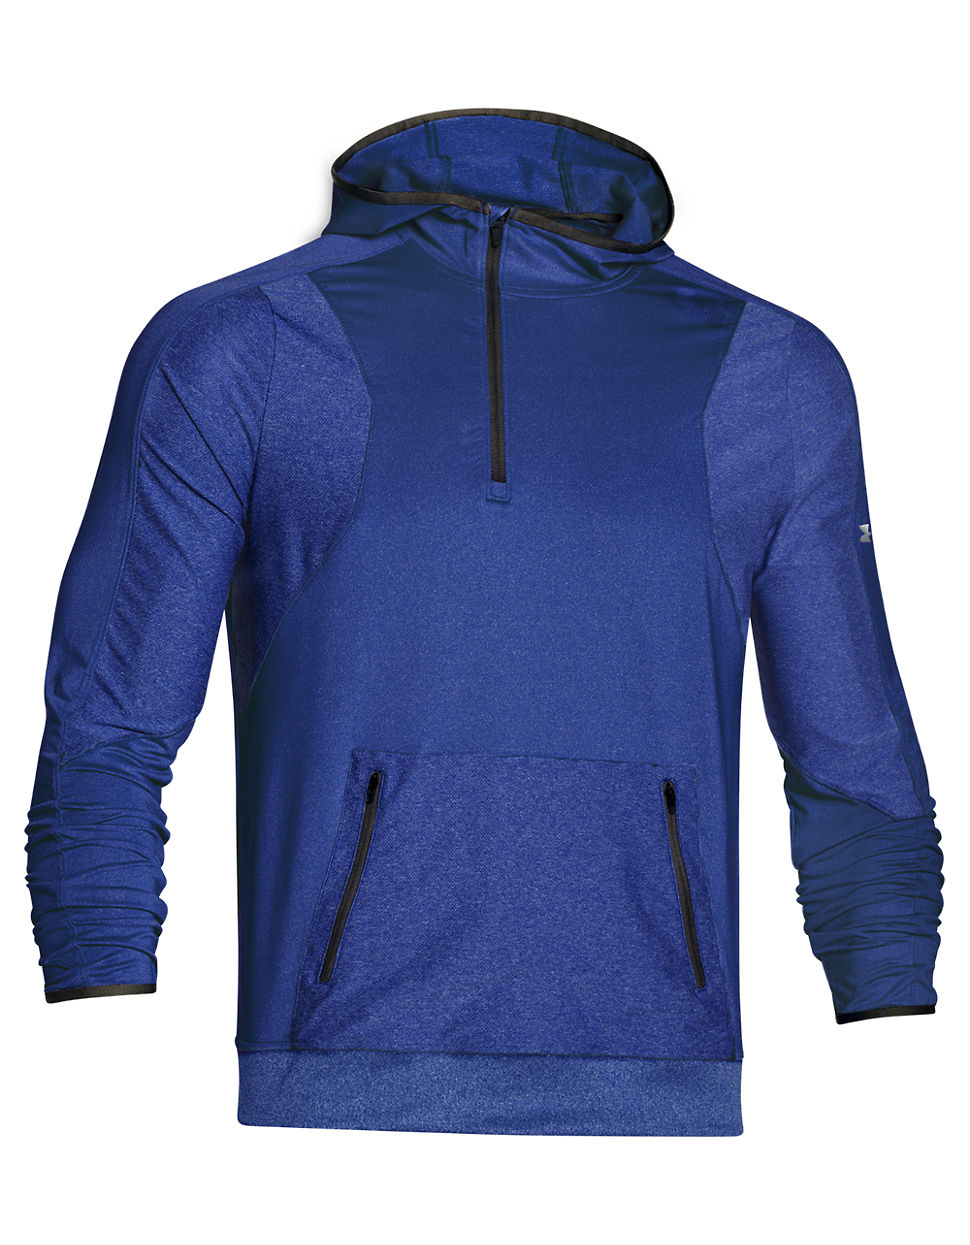 Lyst - Under Armour Forum Hoodie in Blue for Men